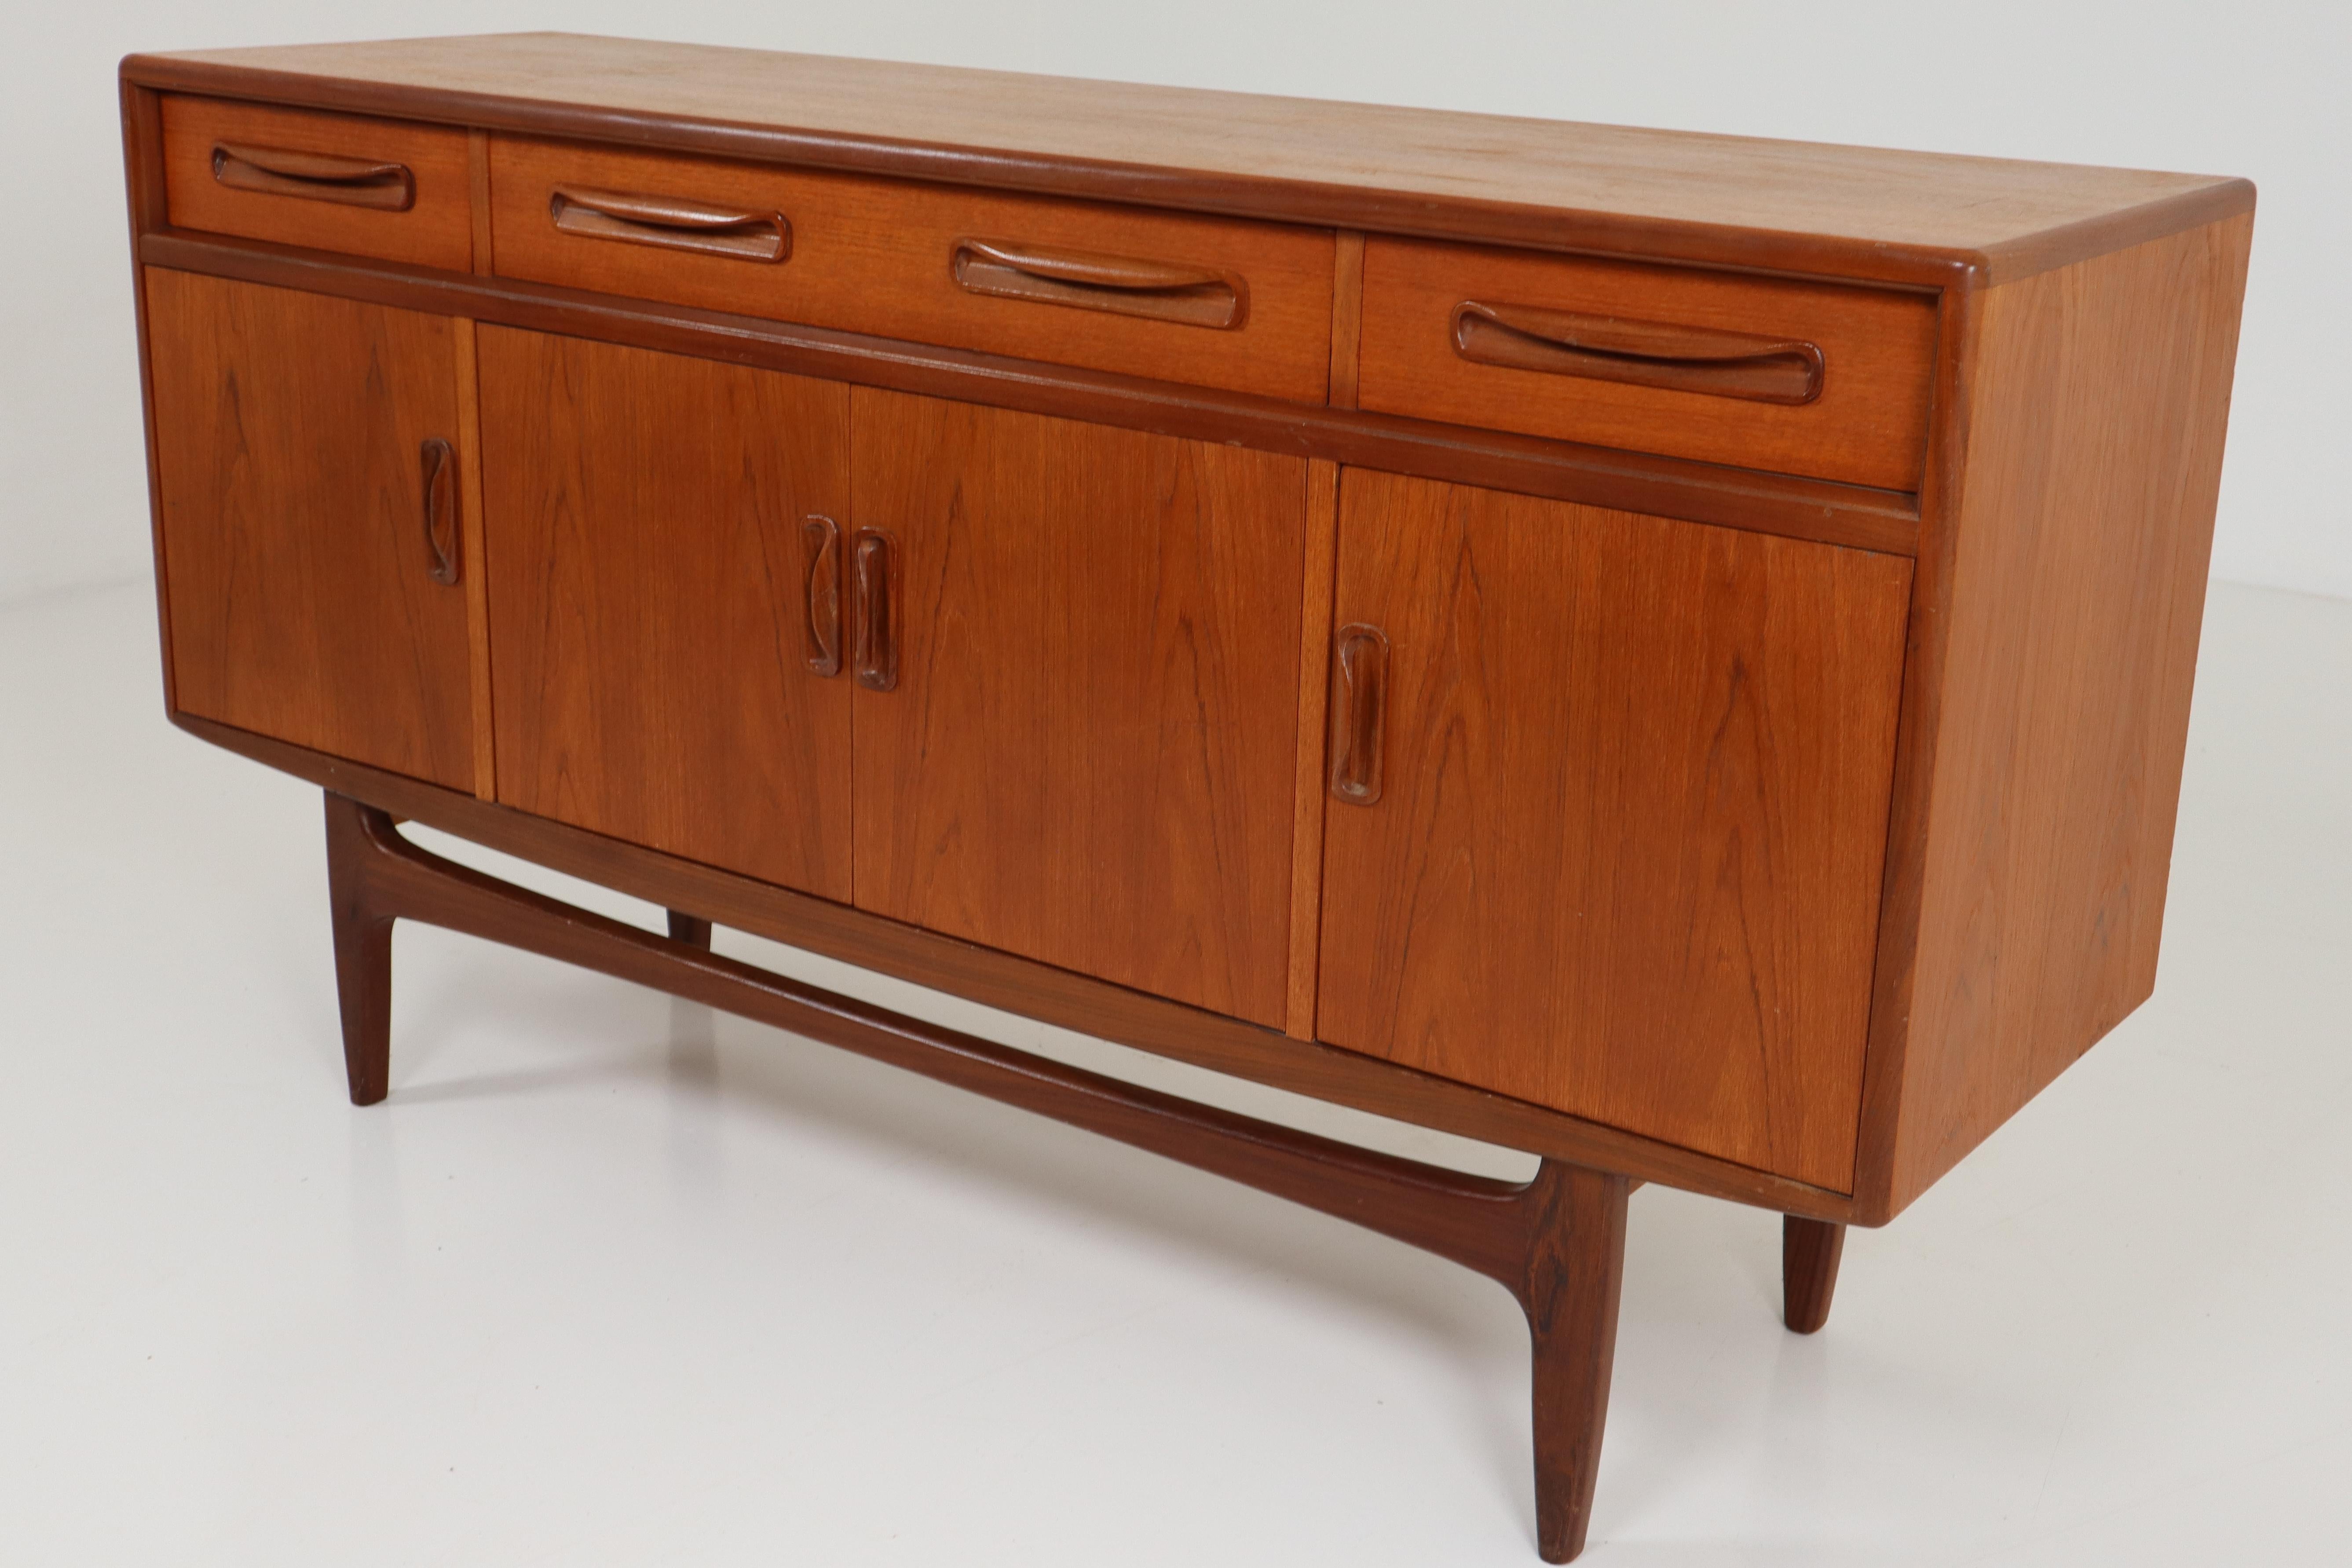 English Victor Wilkins for G-Plan Teak and Afromosia Midcentury Credenza, England, 1960s